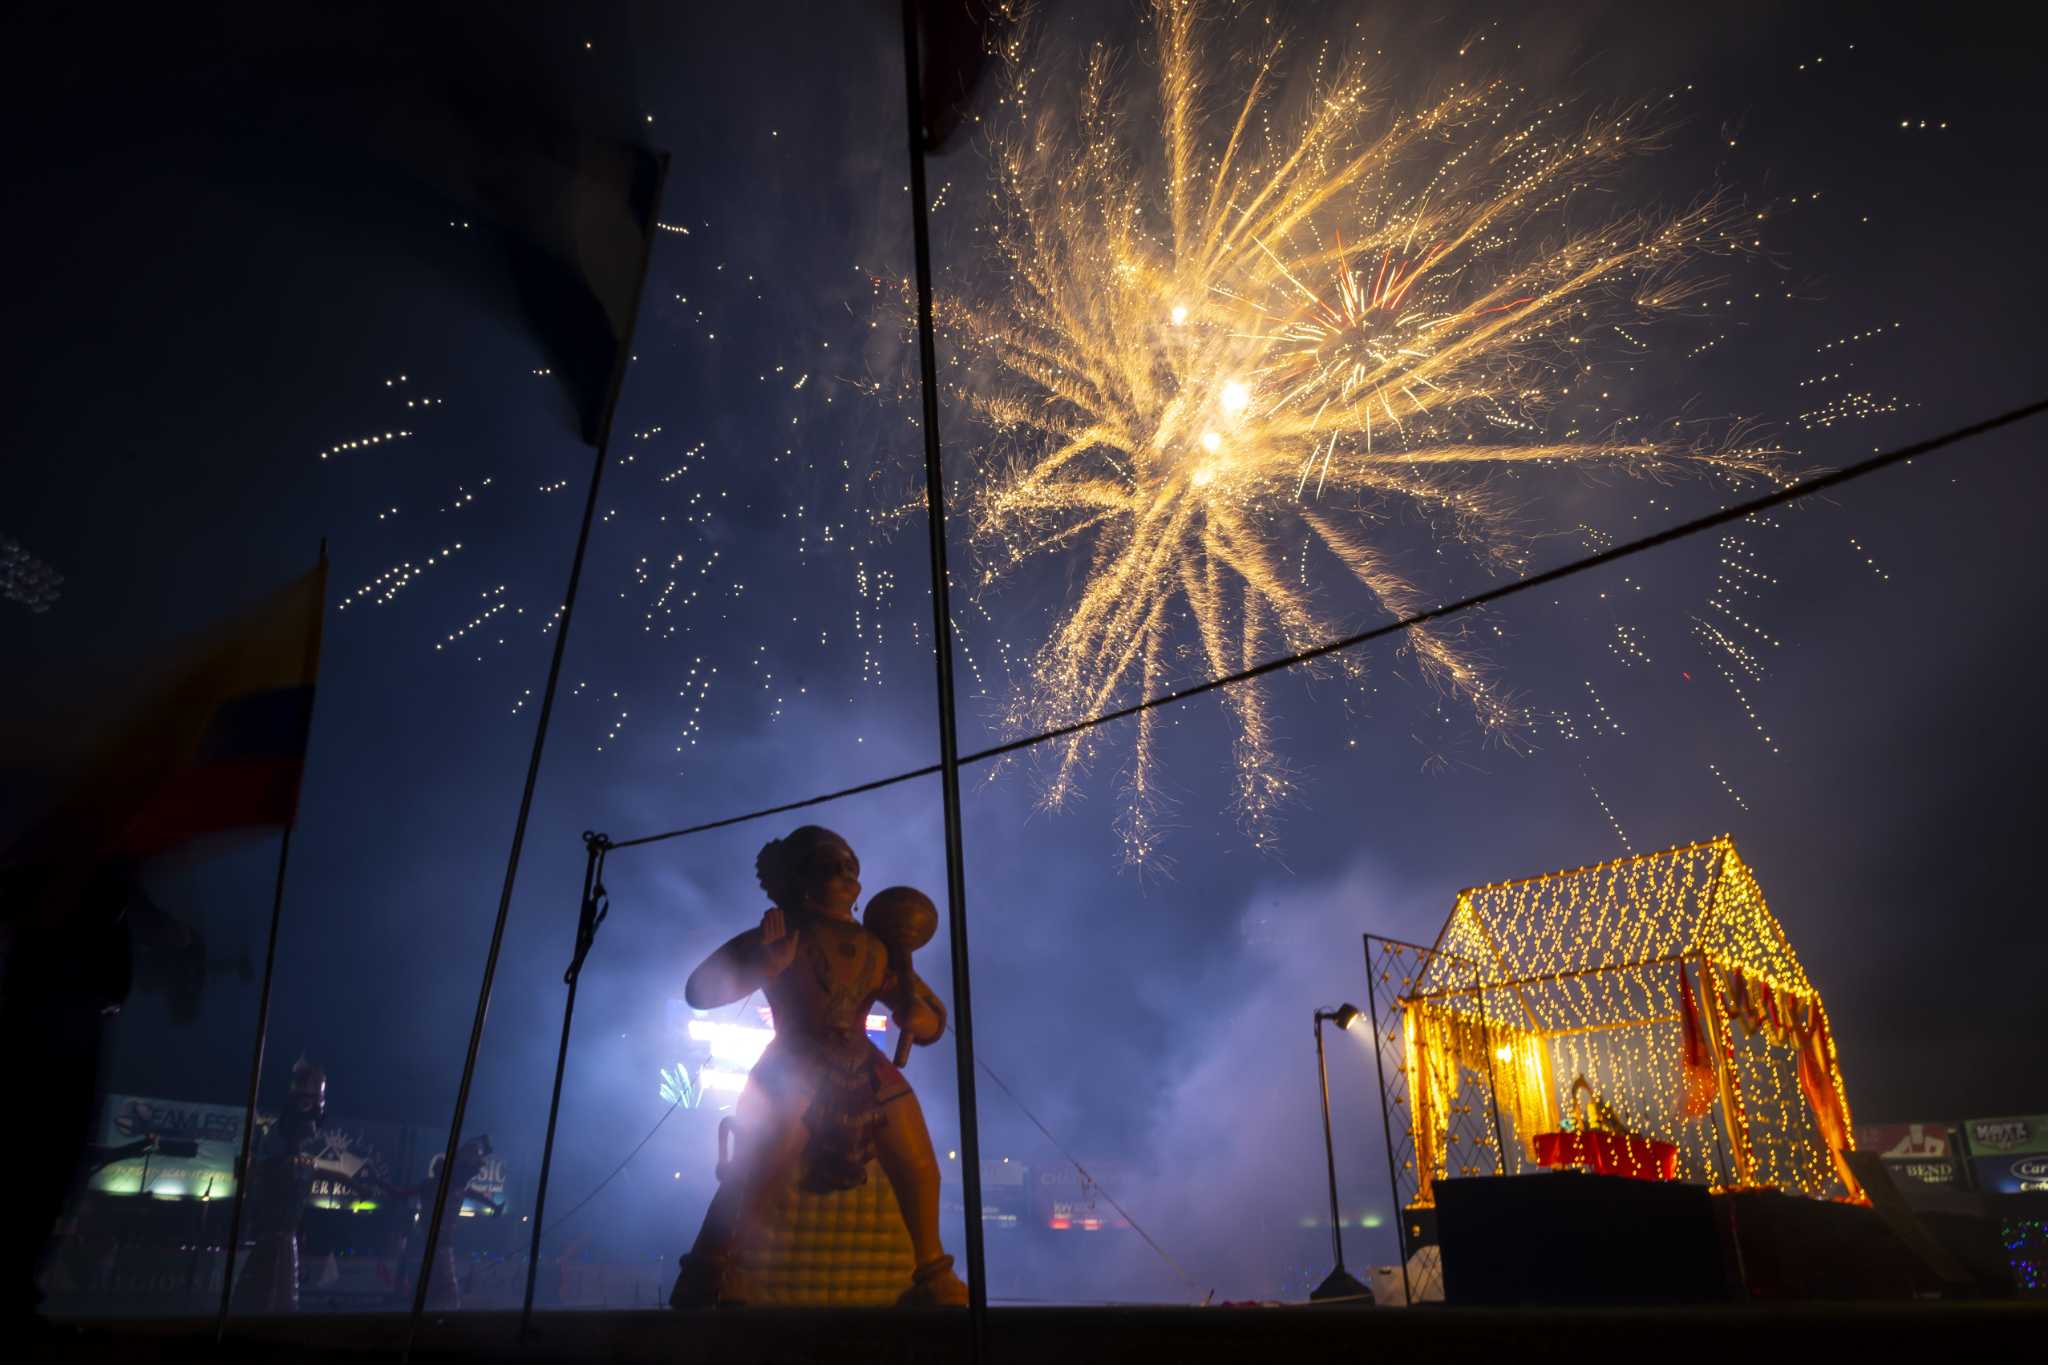 Houston celebrates Diwali, the festival of lights, after 2 quiet years